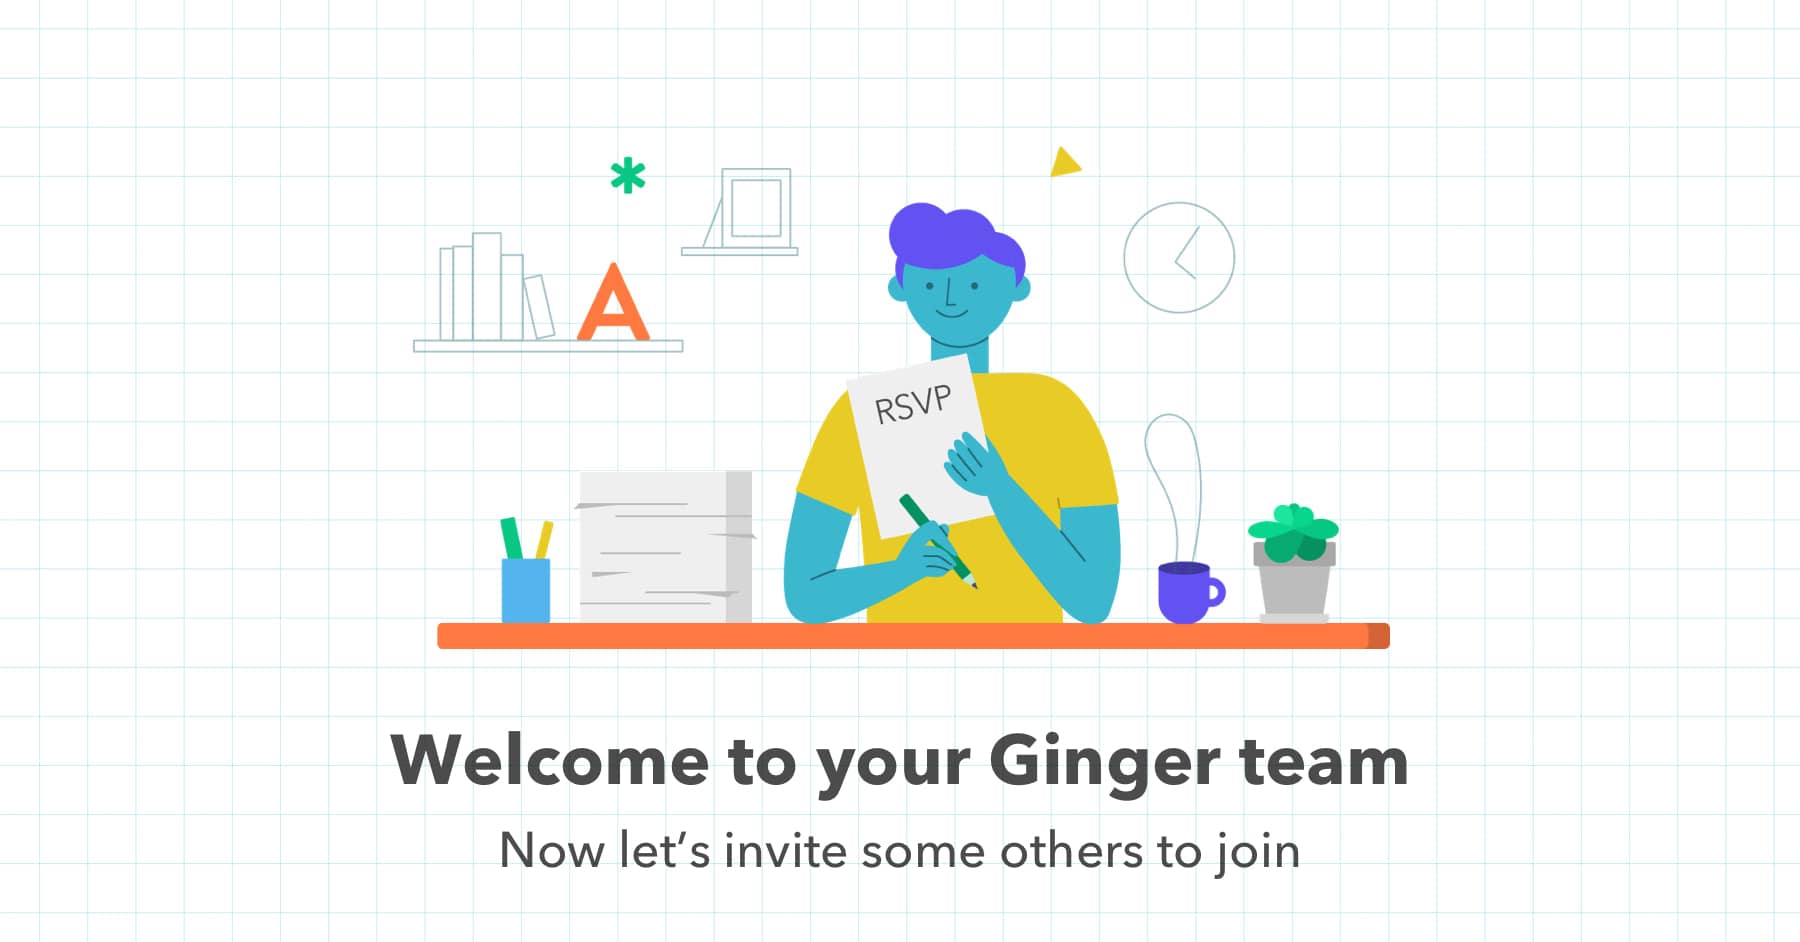 Ginger marketing and product elements